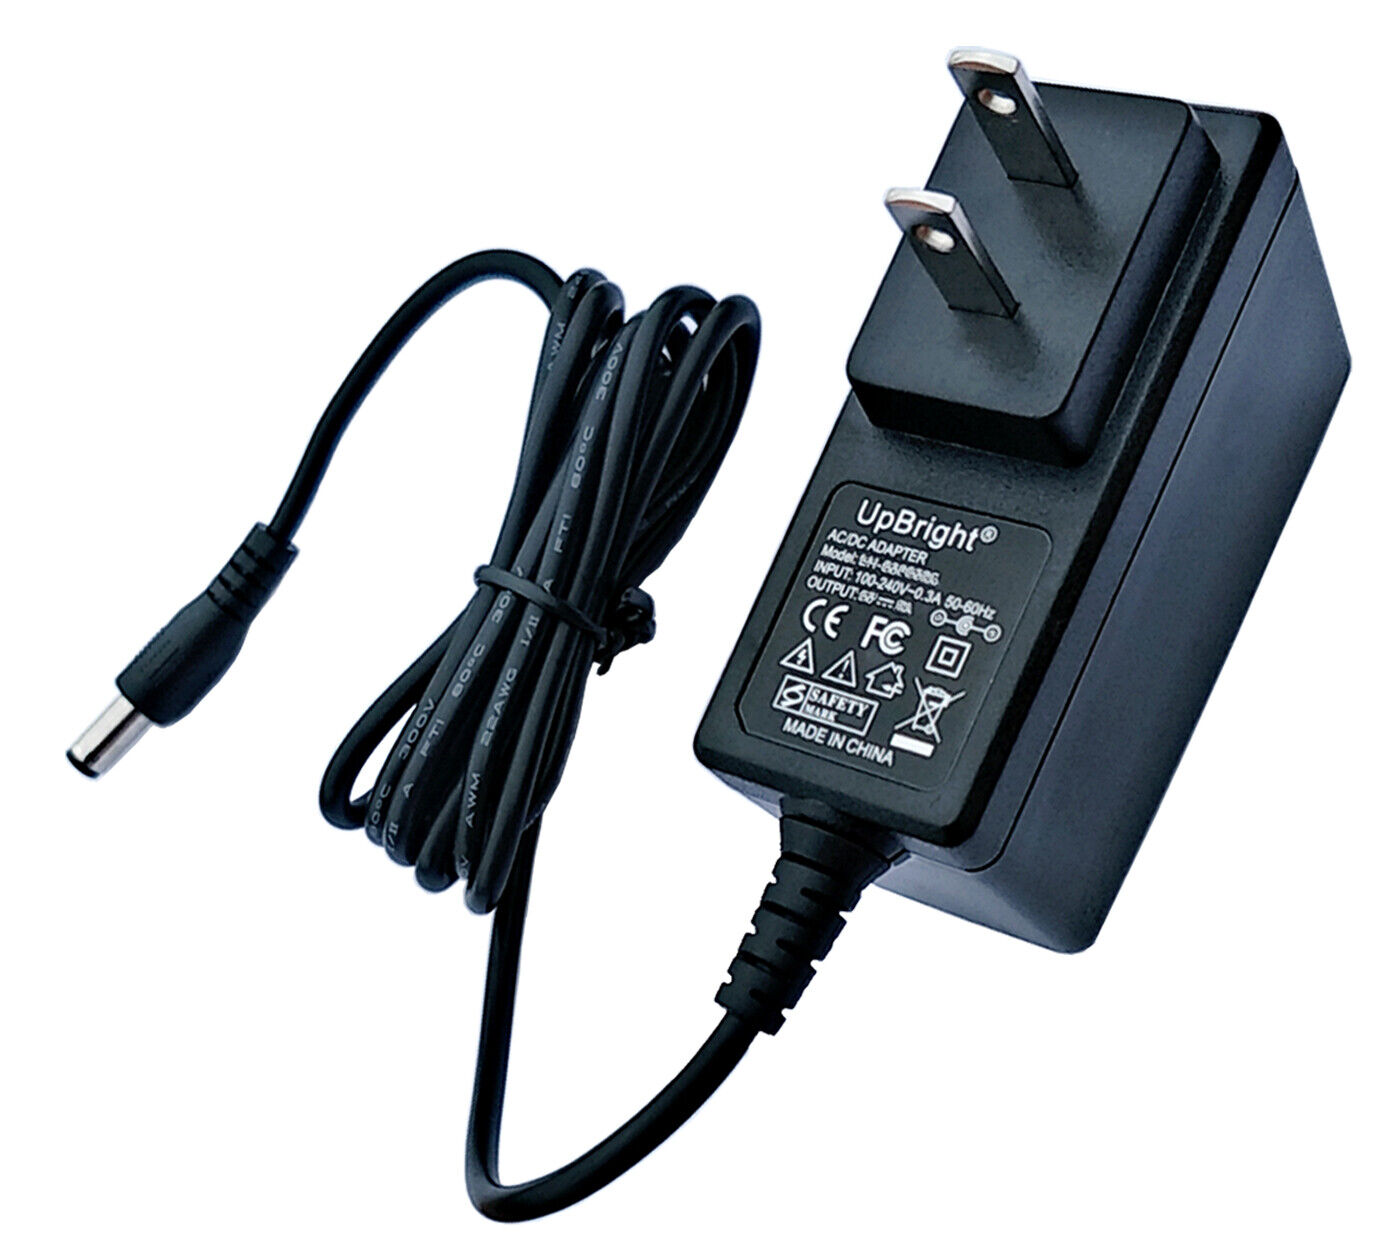 AC Adapter For ProForm Studio Bike Pro 22 or C22 Exercise Bike DC Power Supply